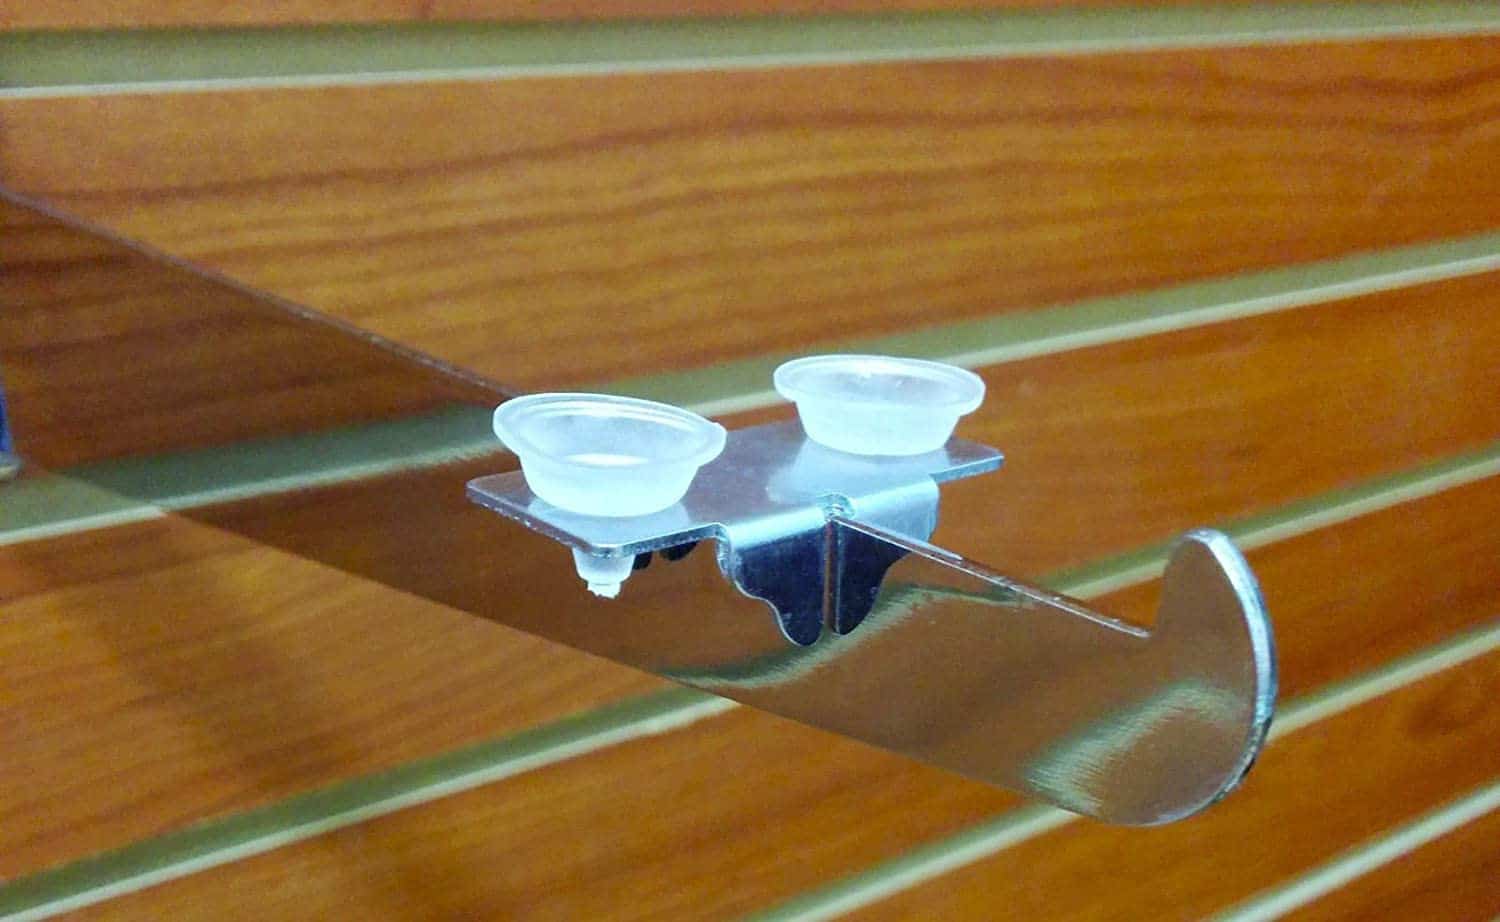 shelf bracket clips to hold adjustable wall shelving in place